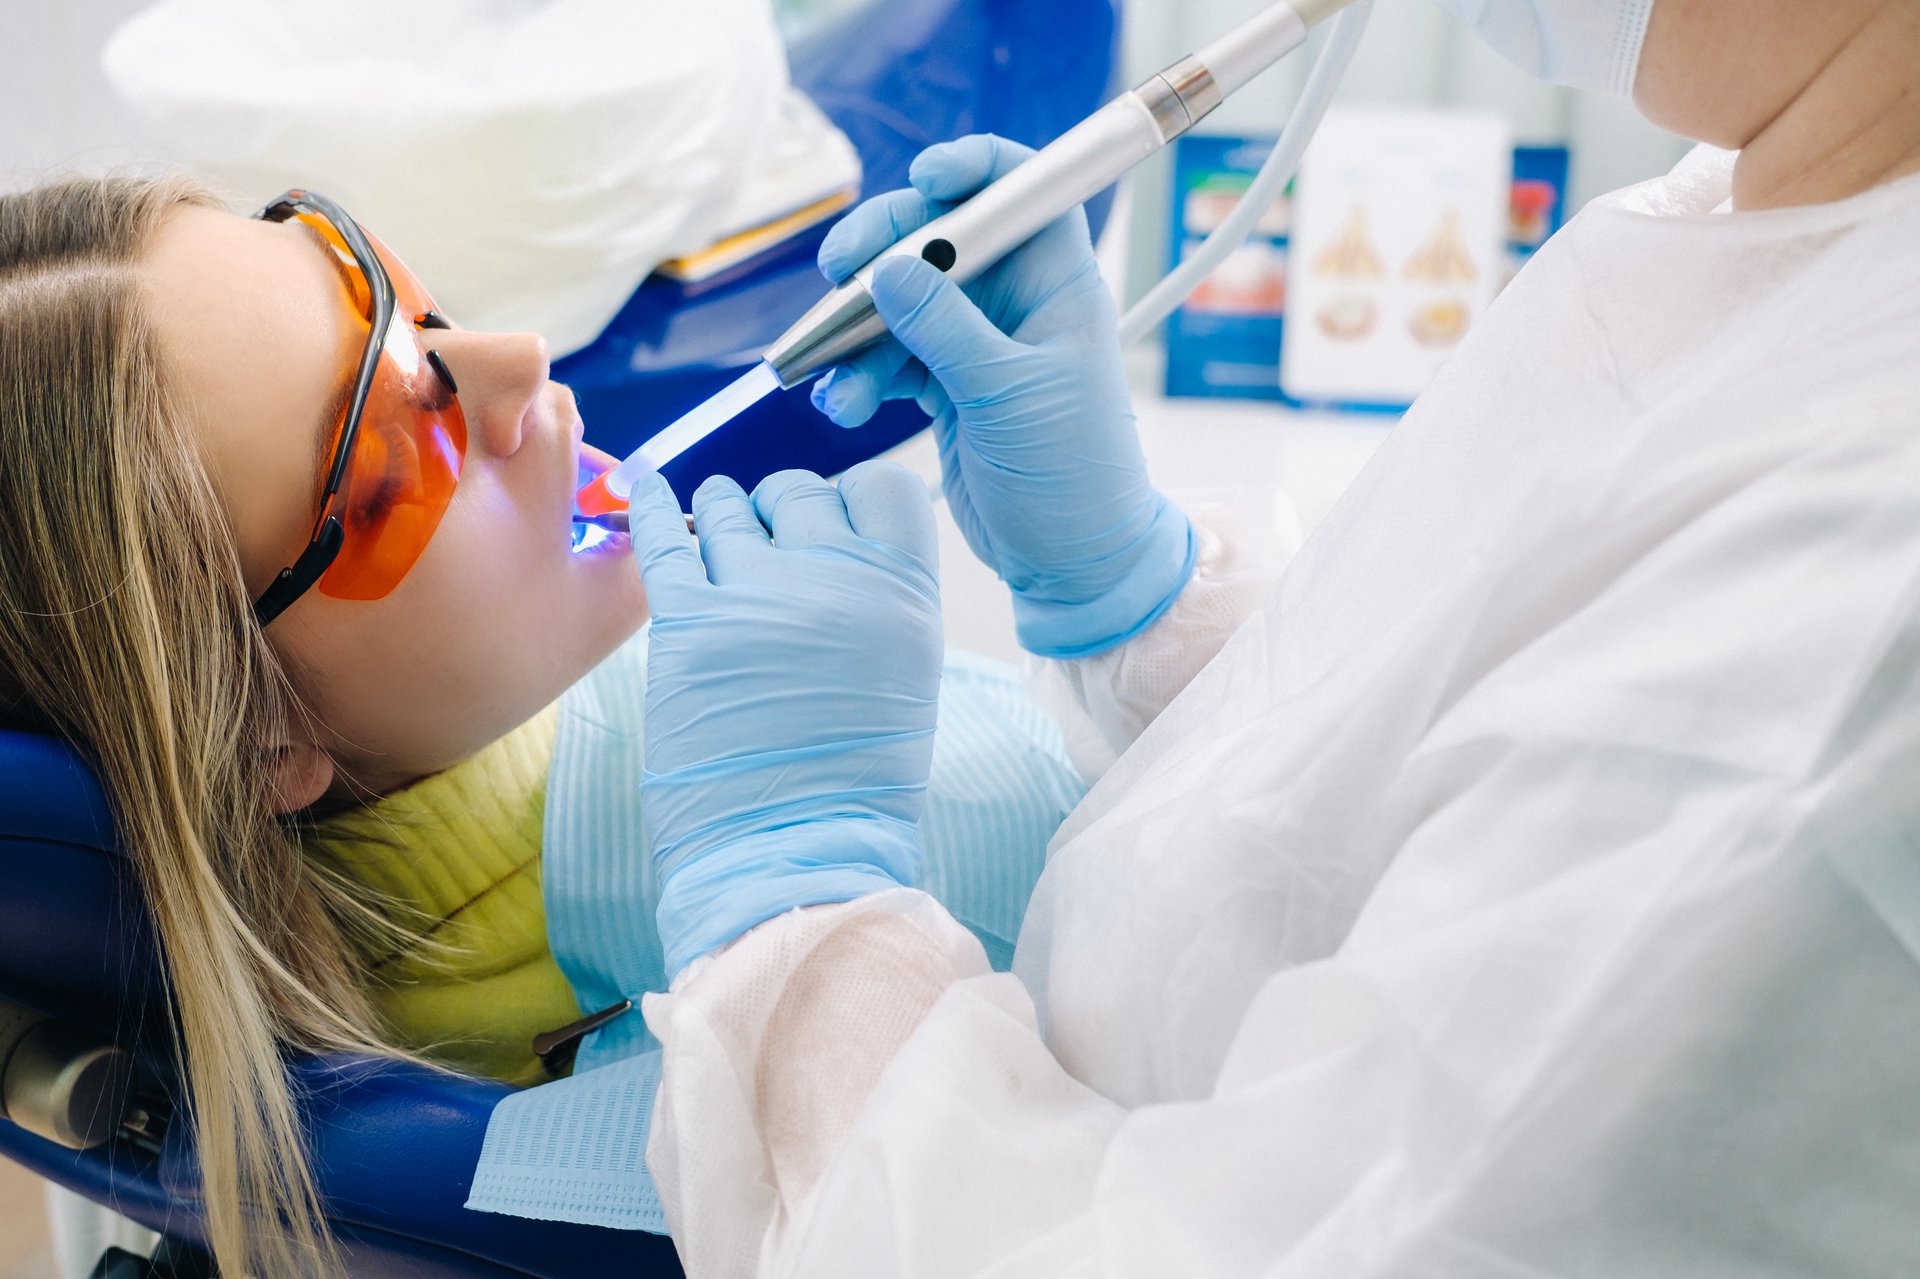 female-patient-in-dental-glasses-treats-teeth-at-the-dentist-with-ultraviolet-light-dental-fillings